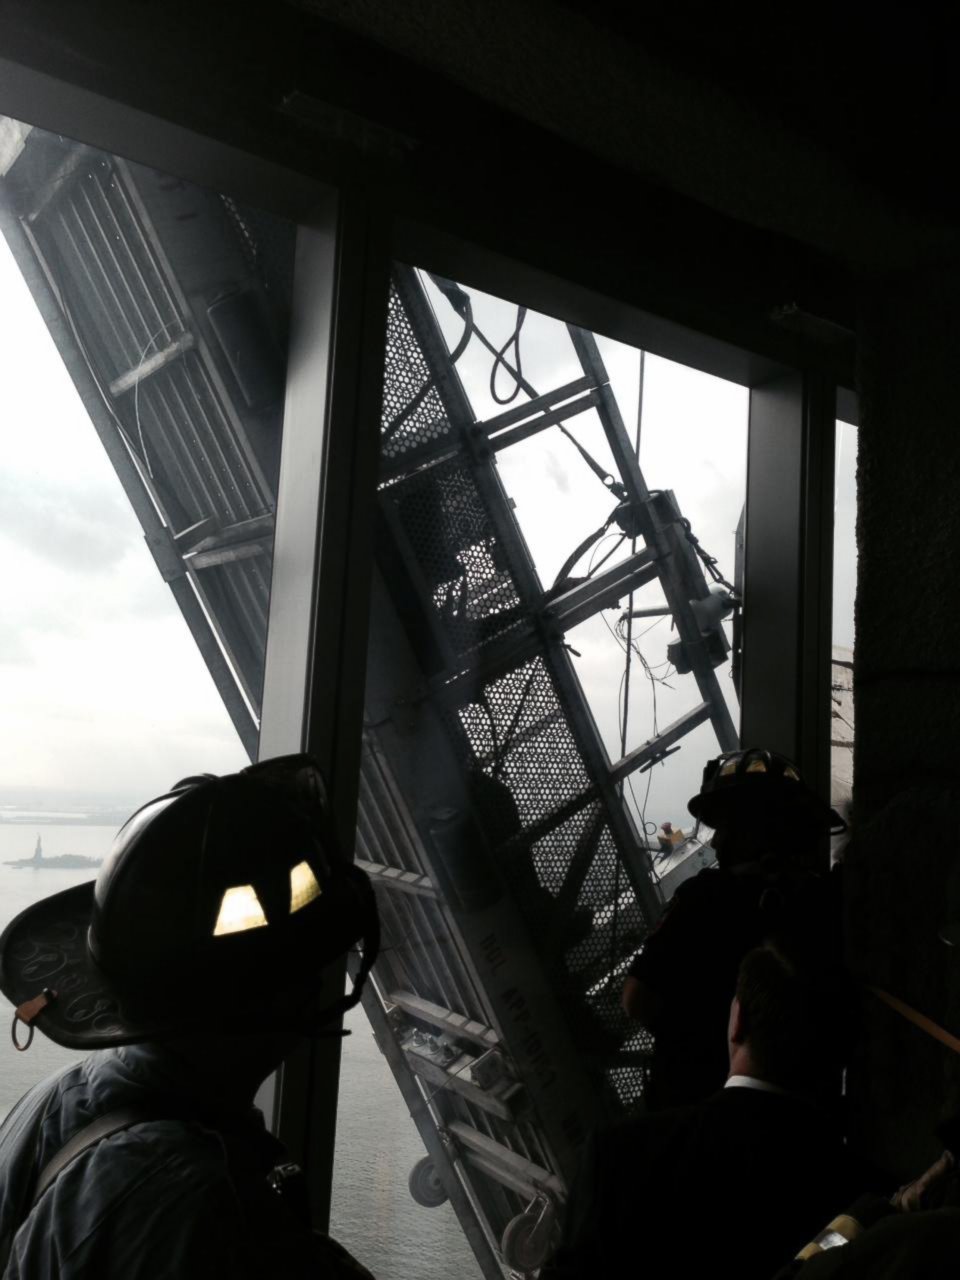 PHOTO: The FDNY posted this photo to Twitter on Nov. 12, 2014 with the caption. "Now: #FDNY rescuing workers trapped on scaffolding outside 1 World Trade Center. View from the 68th floor."